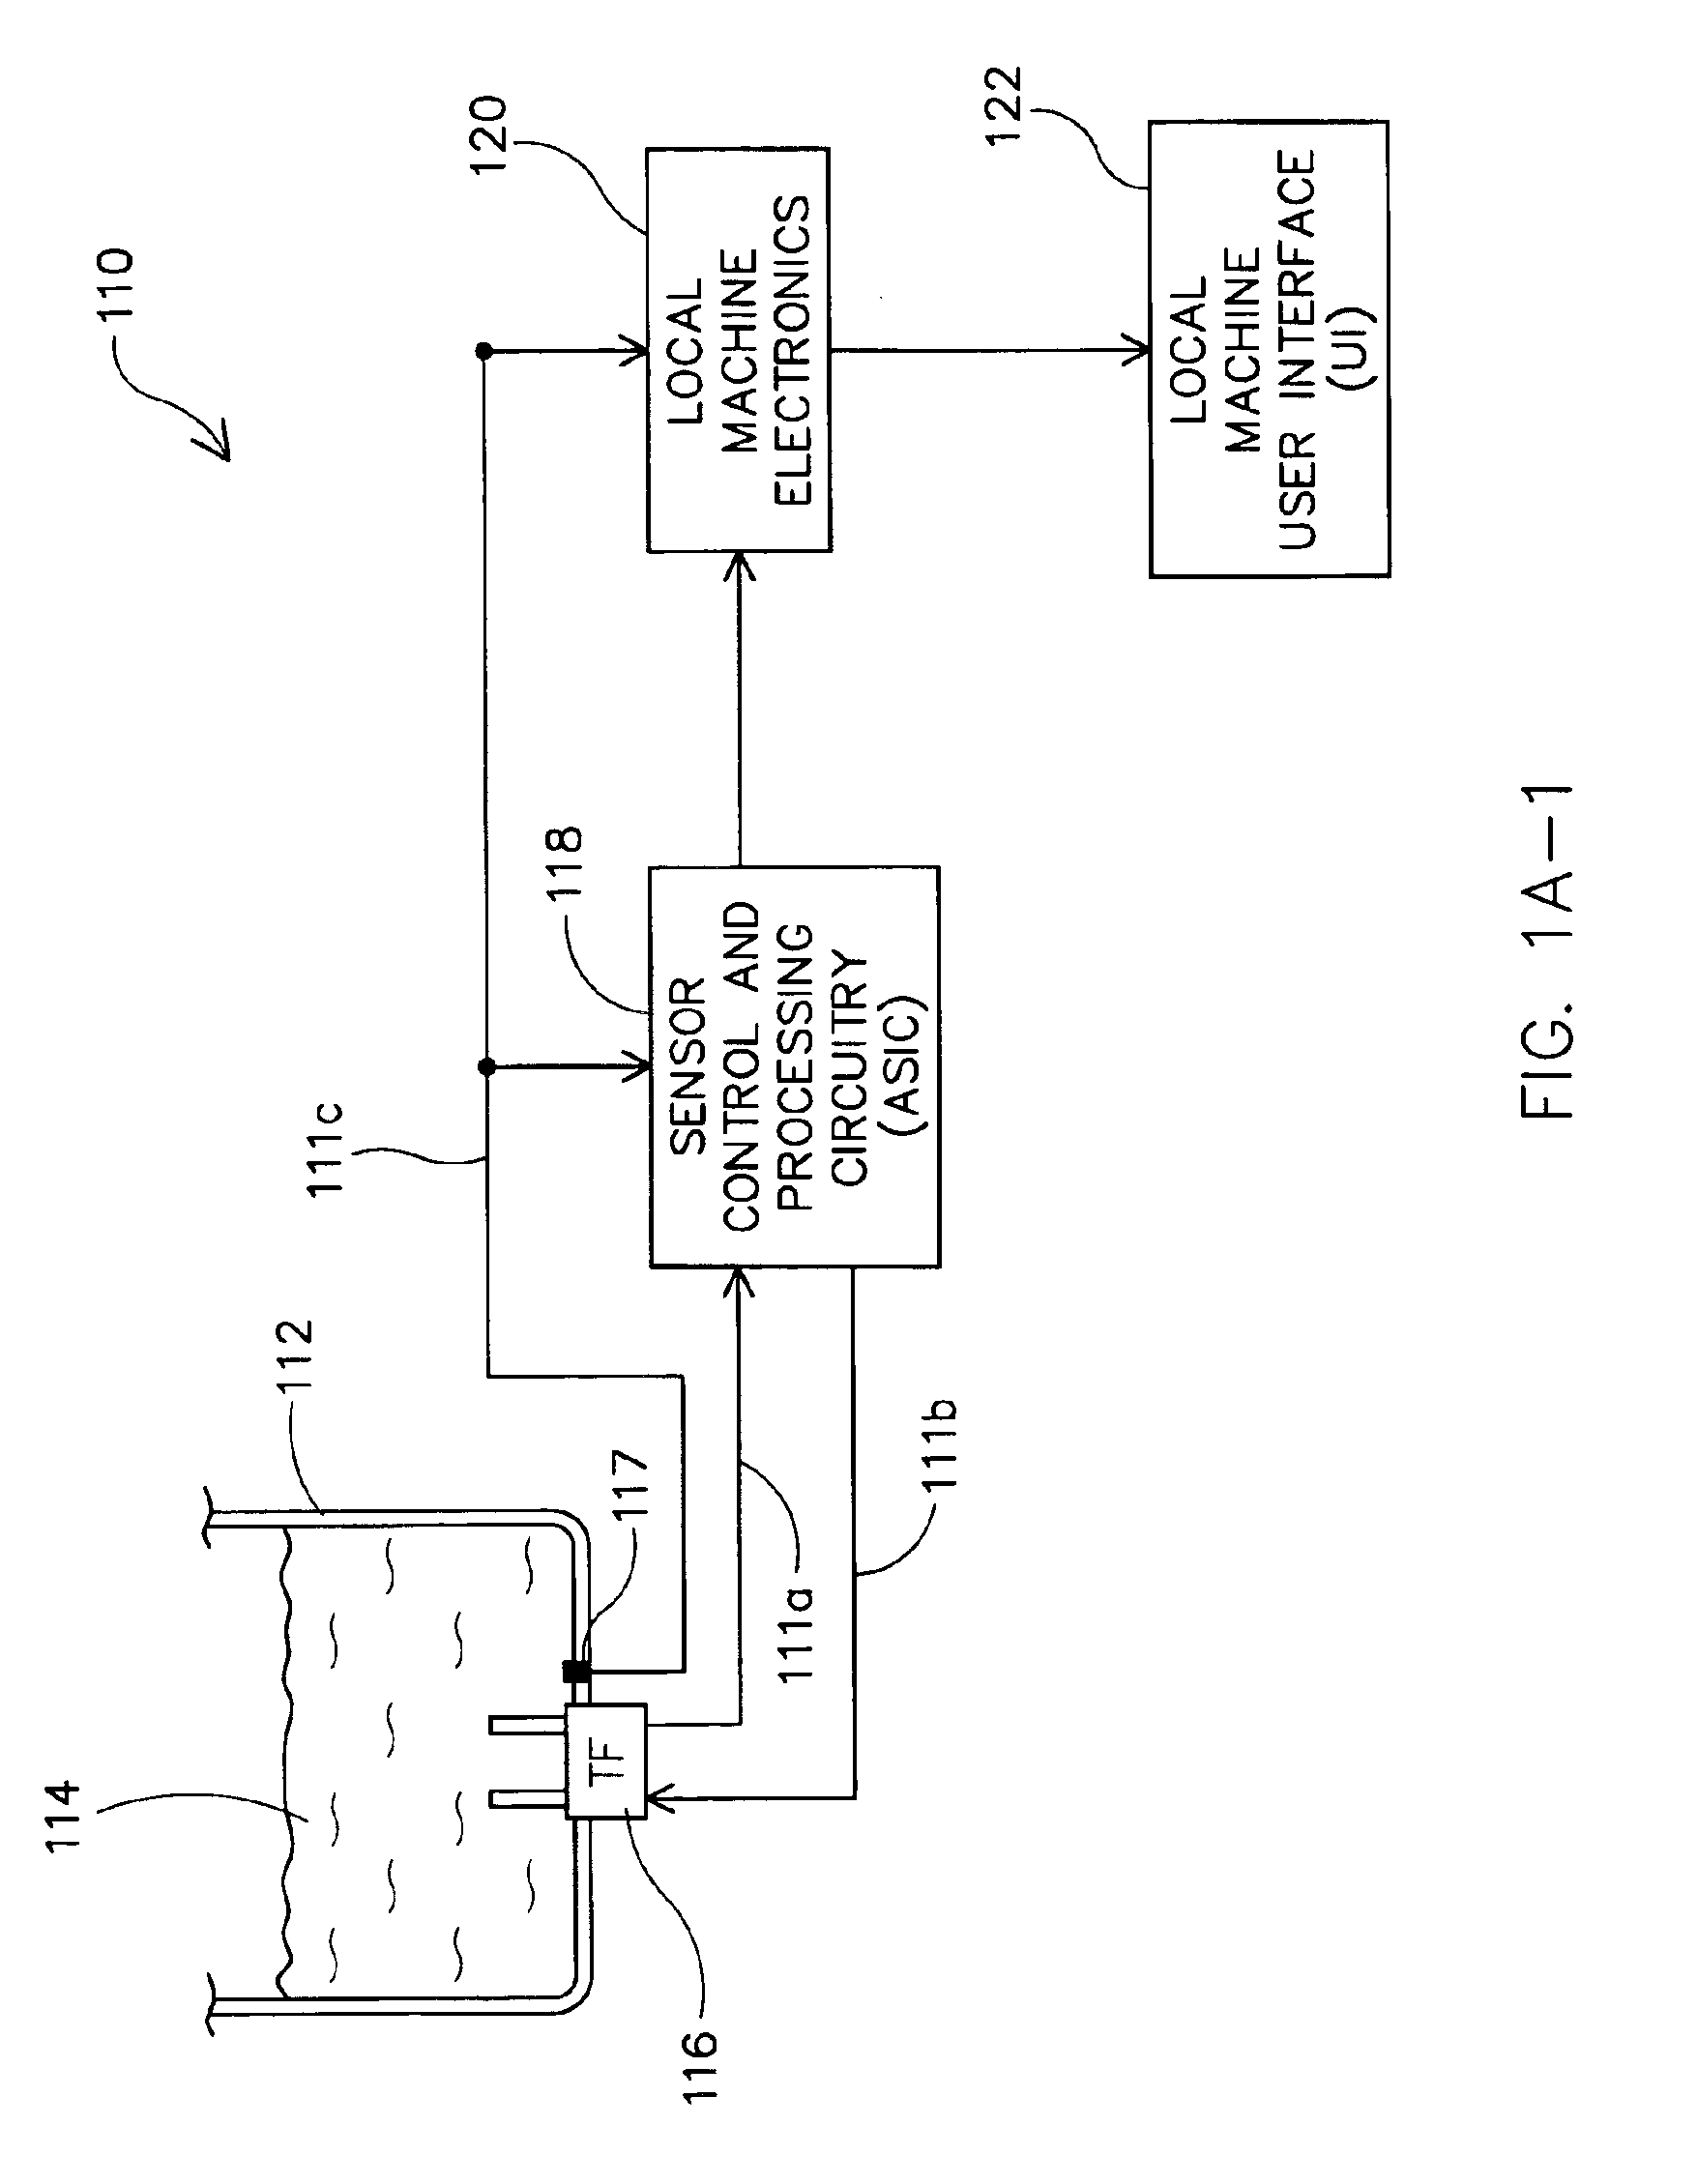 Application specific integrated circuitry for controlling analysis of a fluid